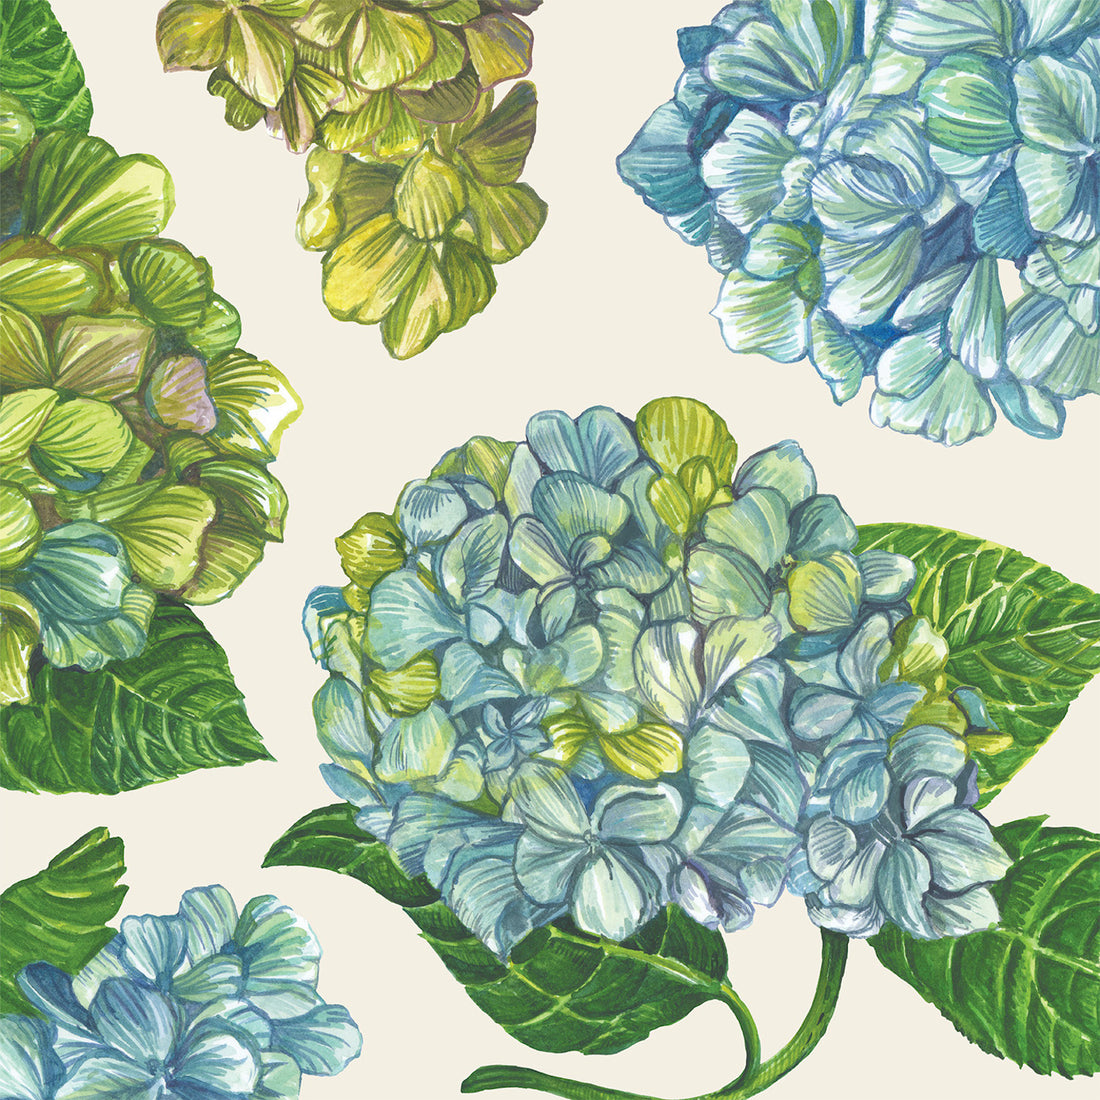 A square cocktail napkin featuring green and blue illustrated hydrangea blossoms scattered over a white background.